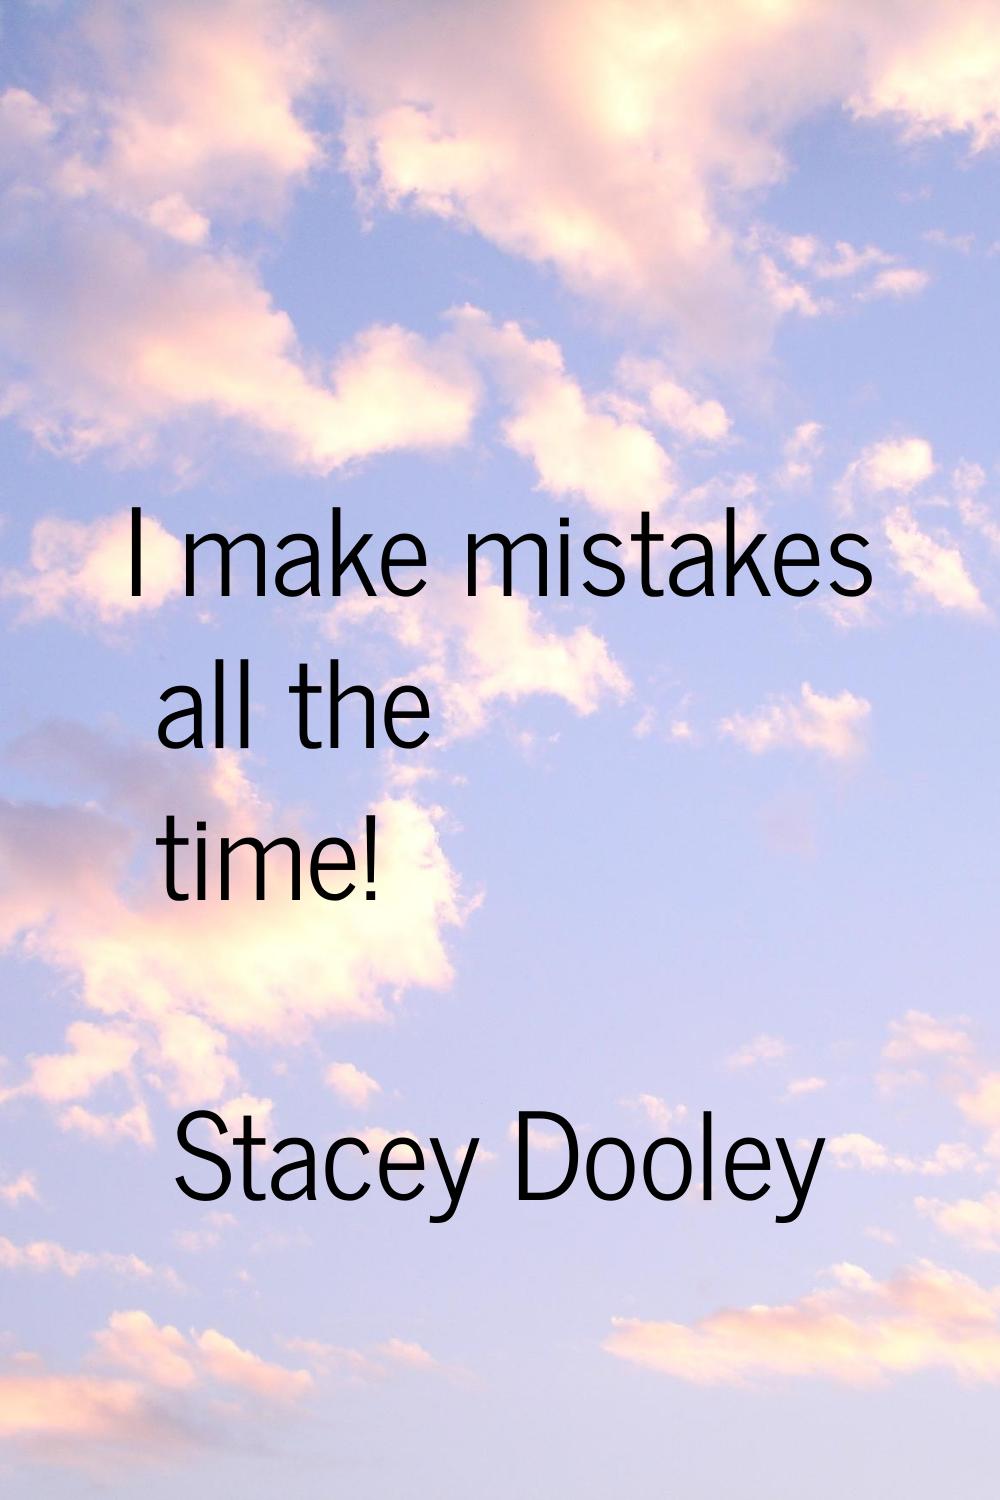 I make mistakes all the time!